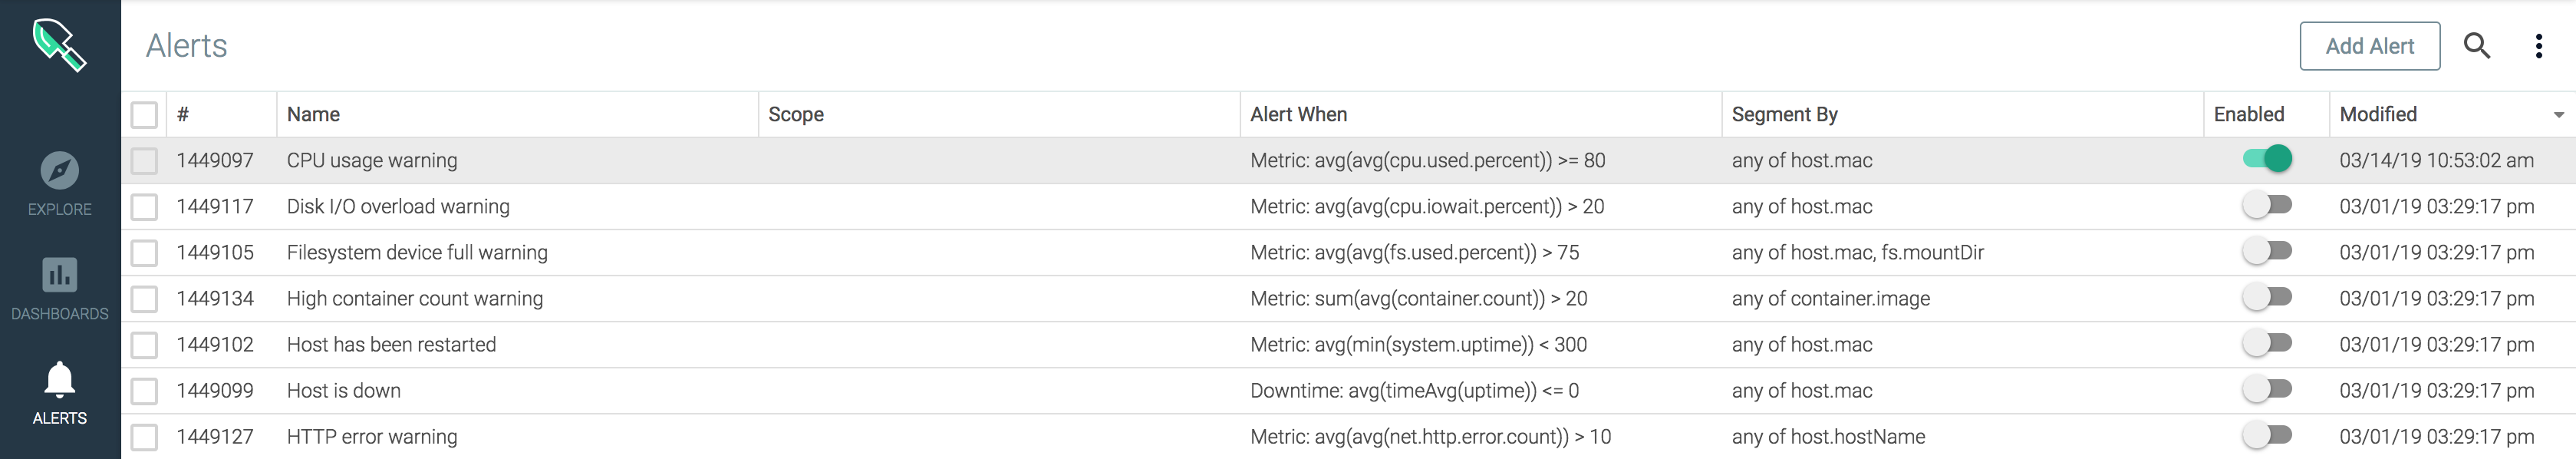 Sysdig Cloud enable alerts